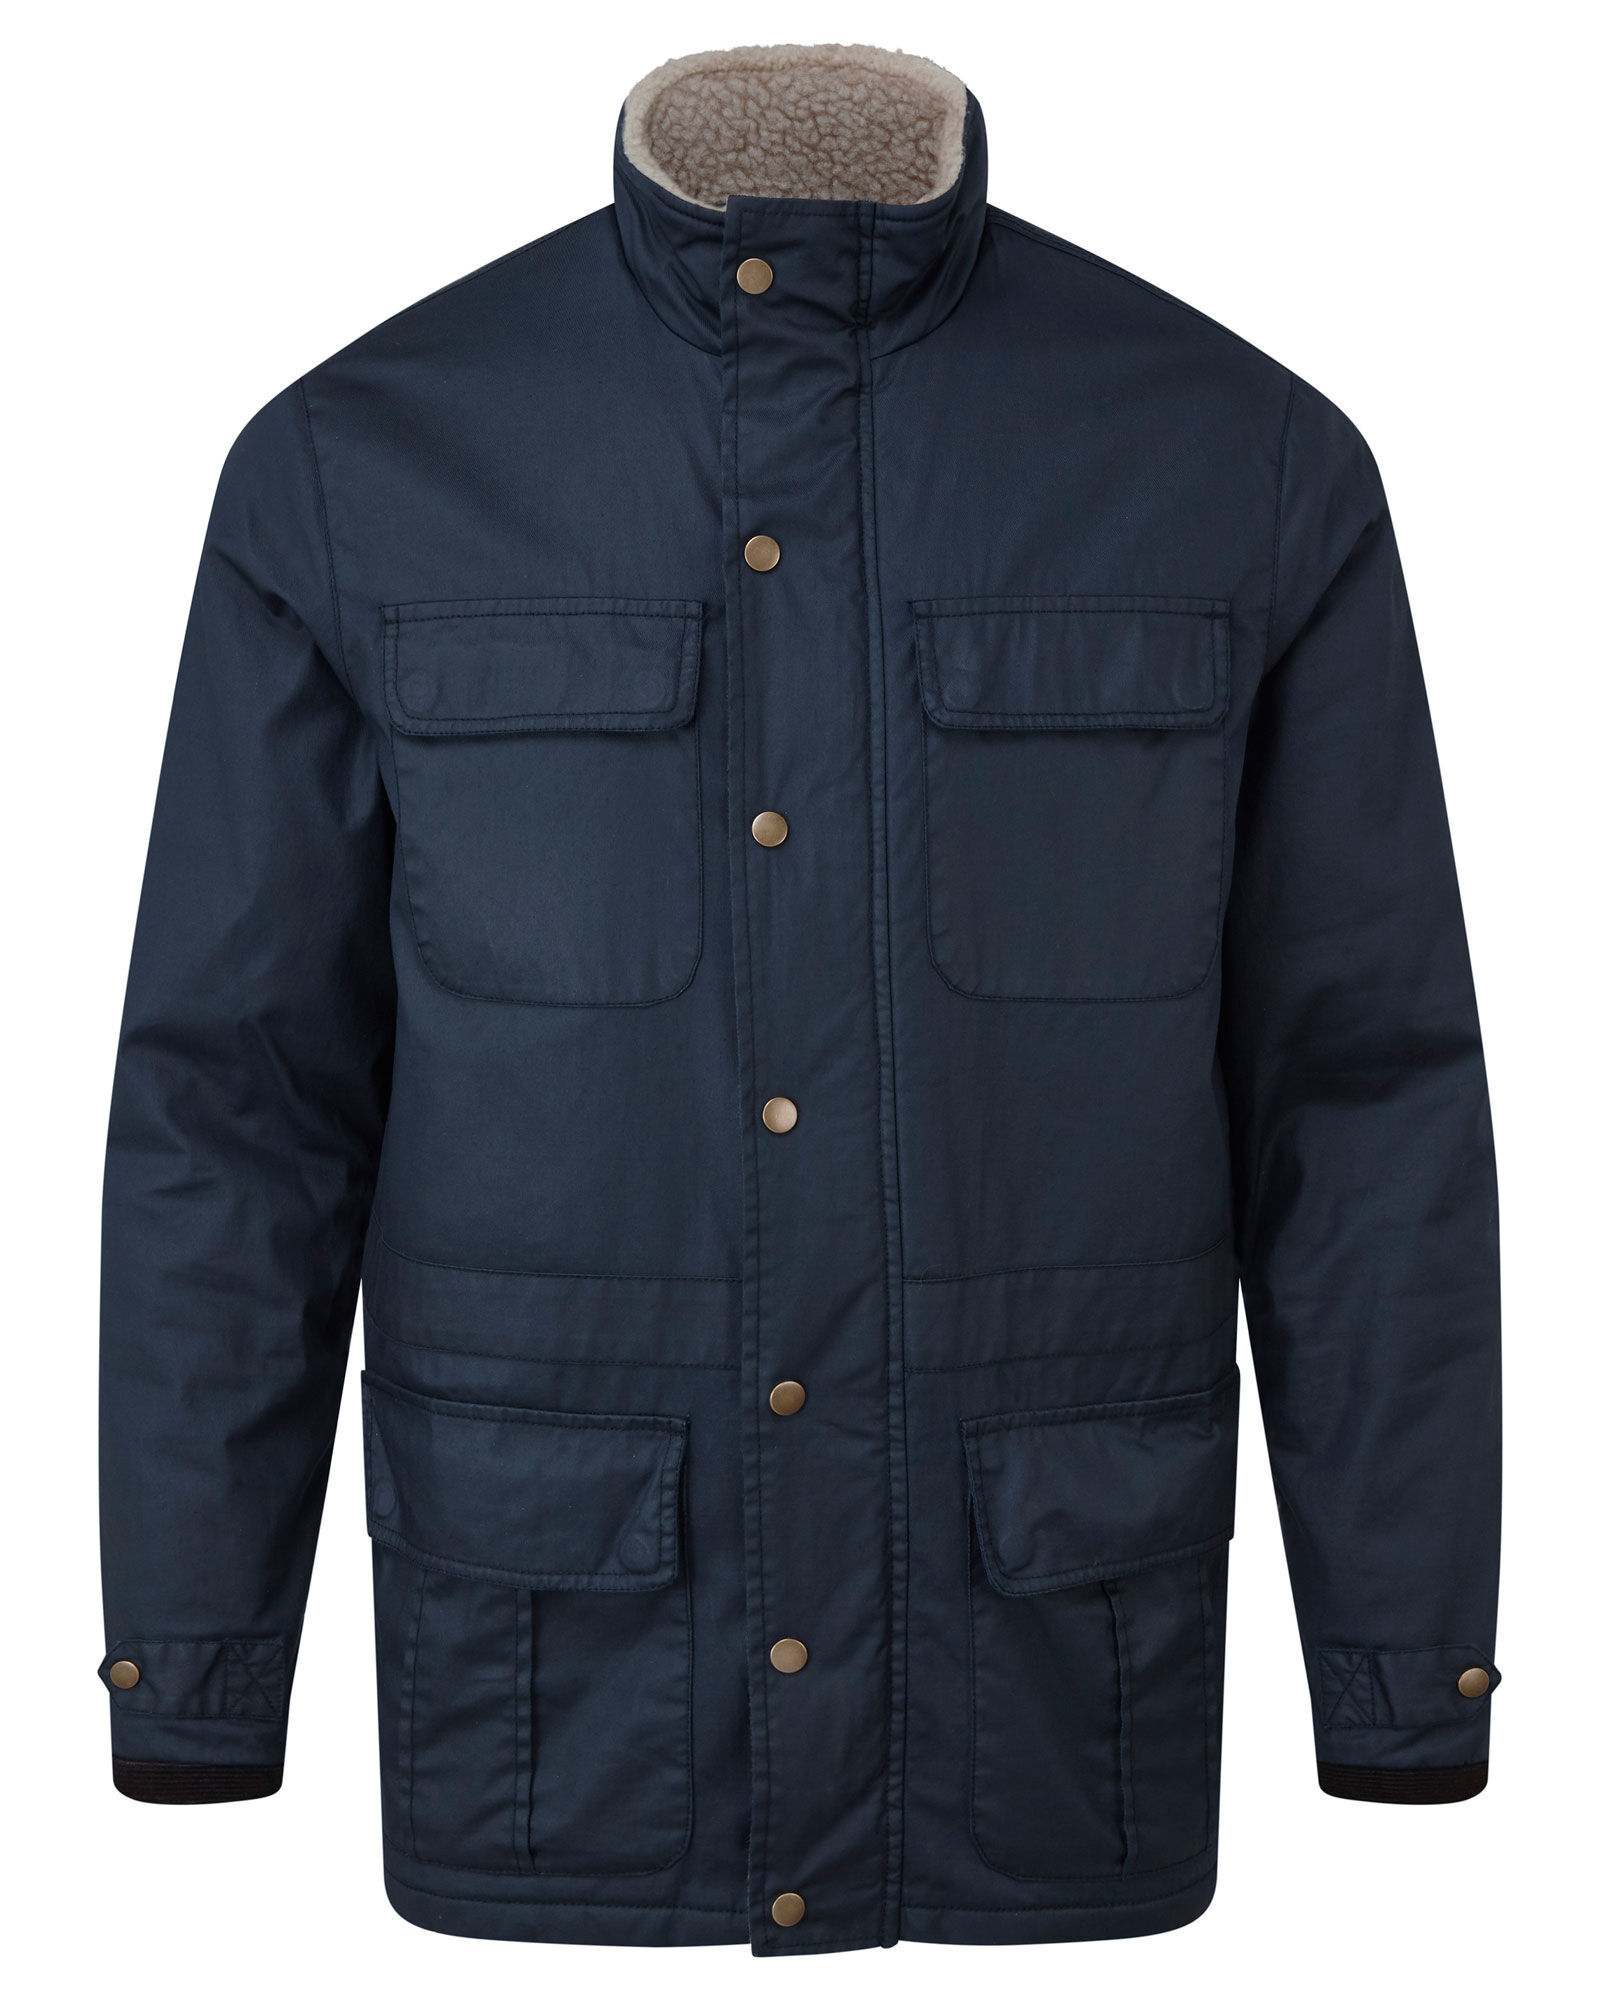 cotton traders jackets